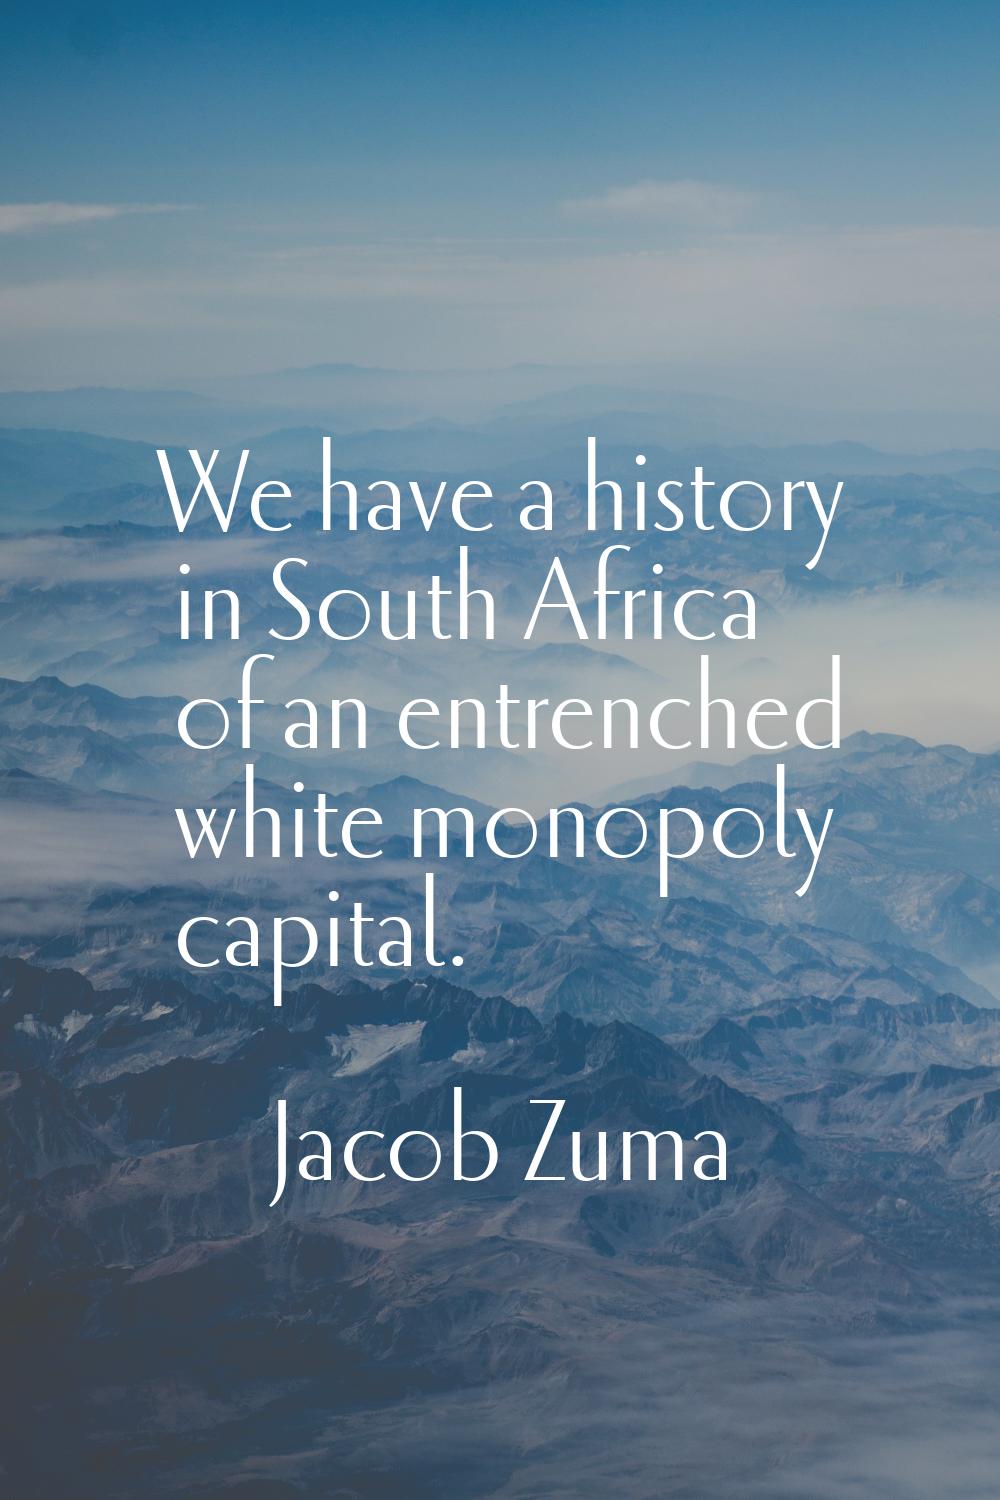 We have a history in South Africa of an entrenched white monopoly capital.